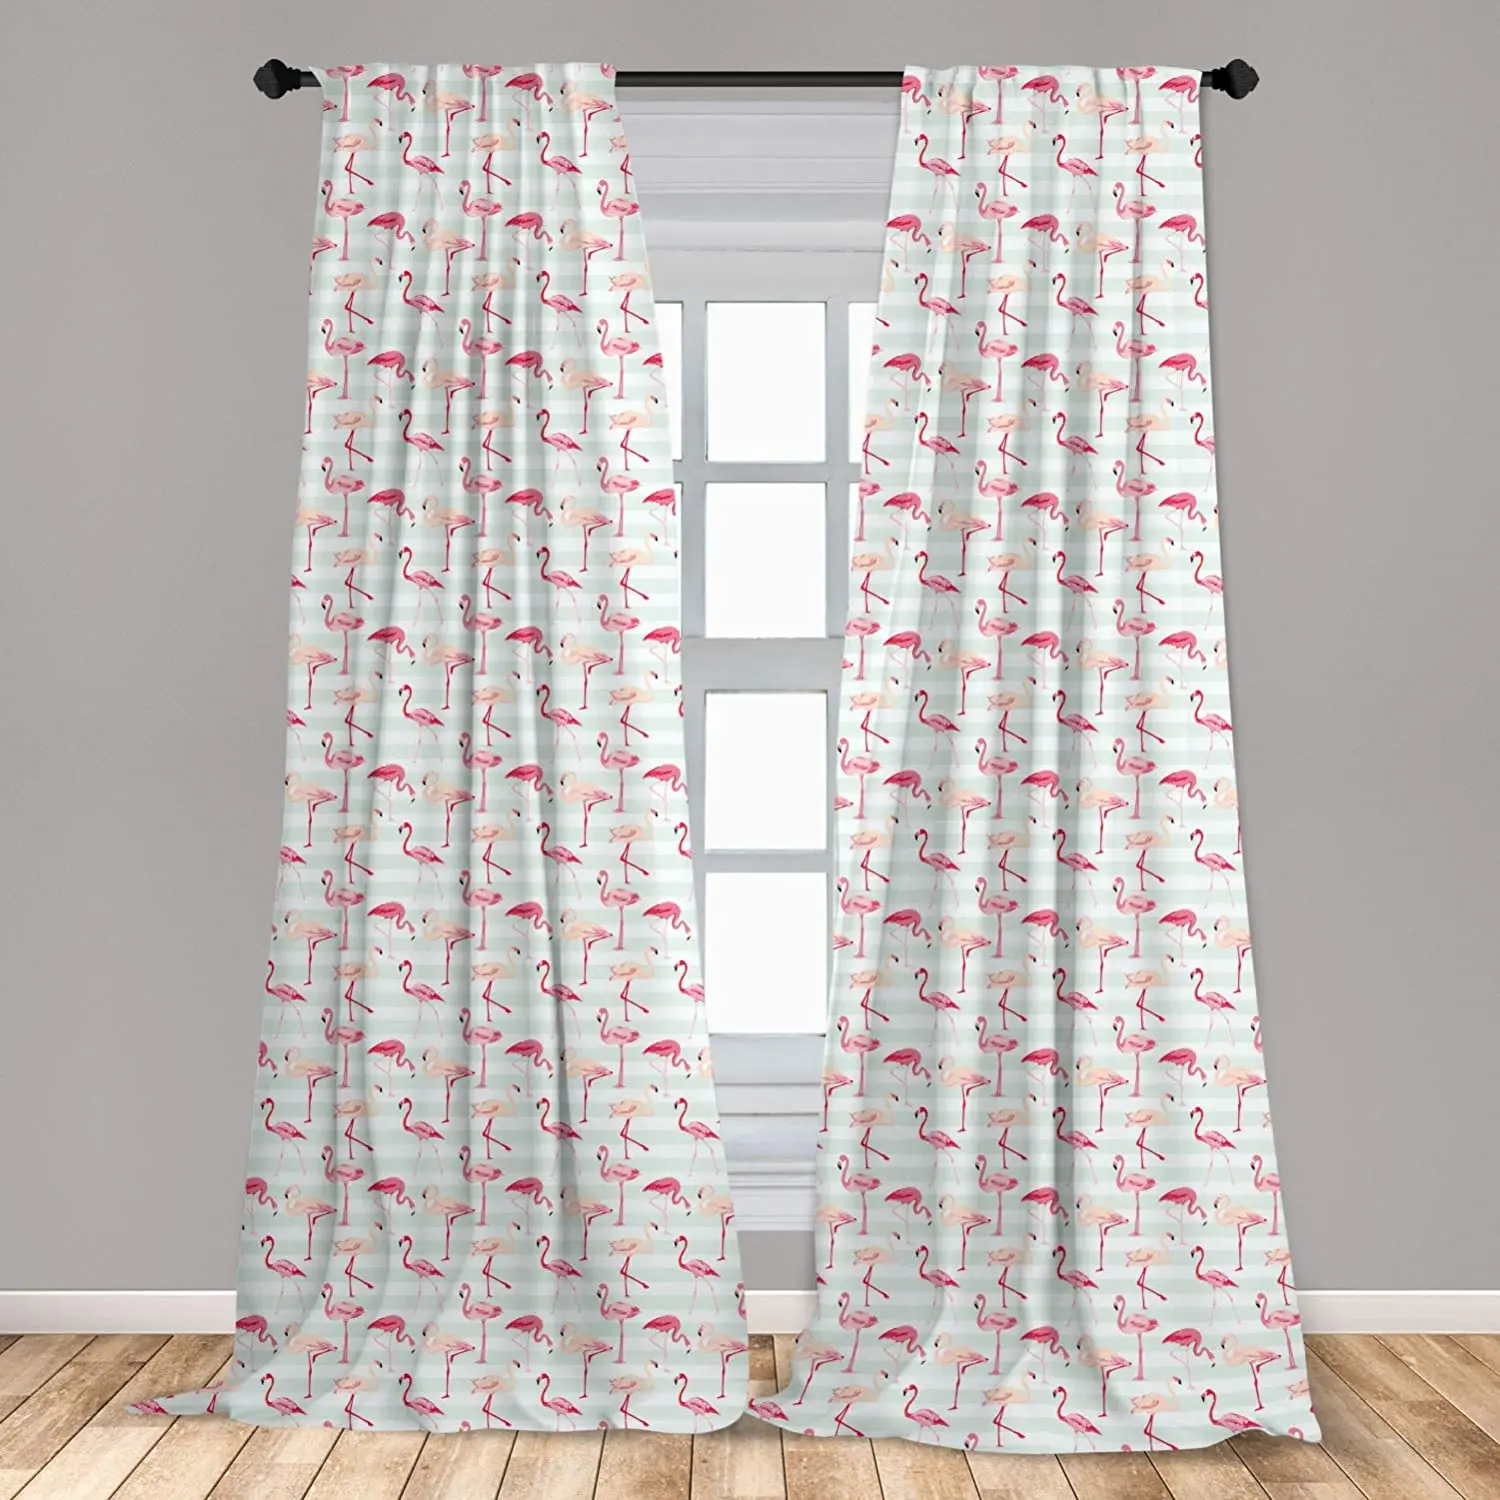 Flamingo Bird Window Valance Curtain in Your Choice of Colors 